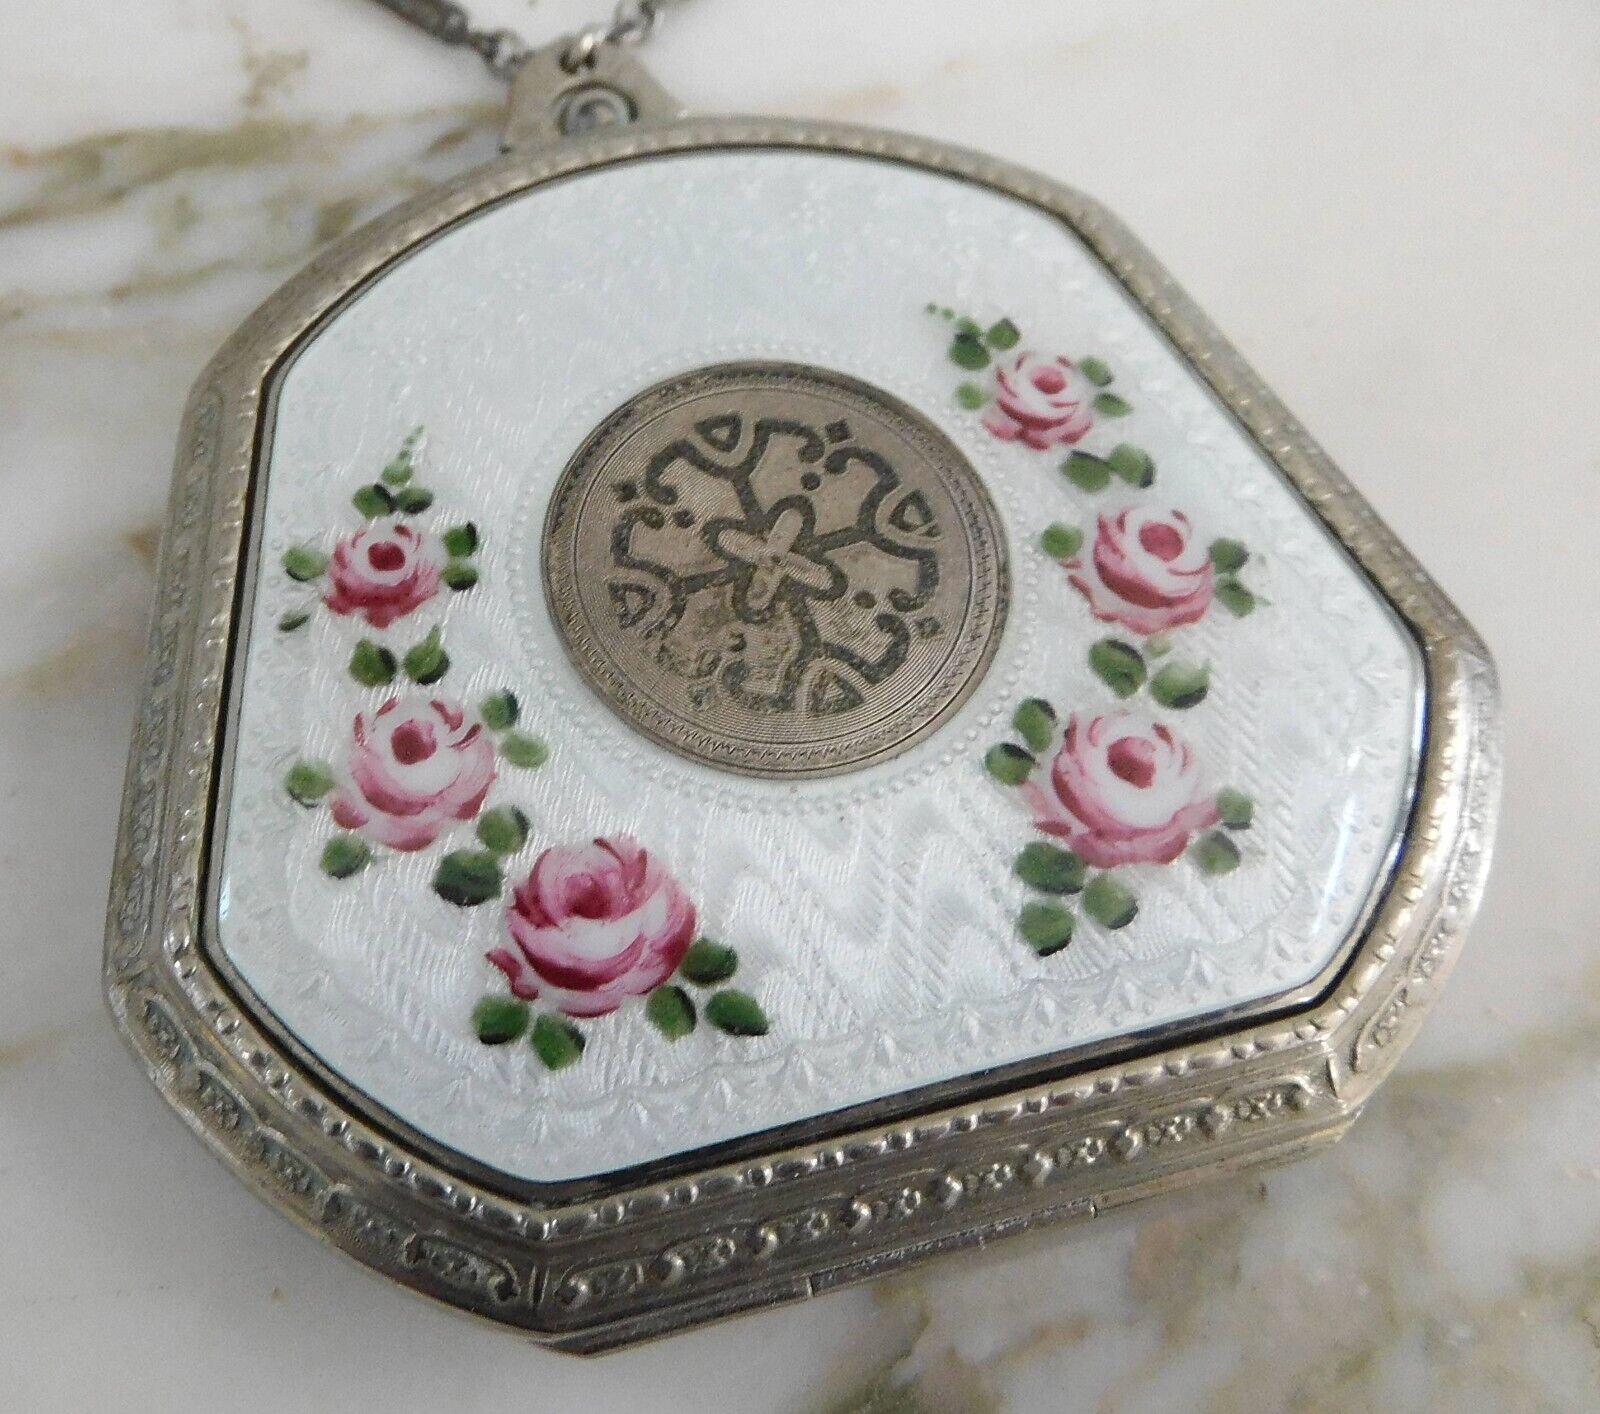 ANTIQUE VINTAGE 1920’S GUILLOCHE ENAMEL COMPACT HAND PAINTED PINK ROSES